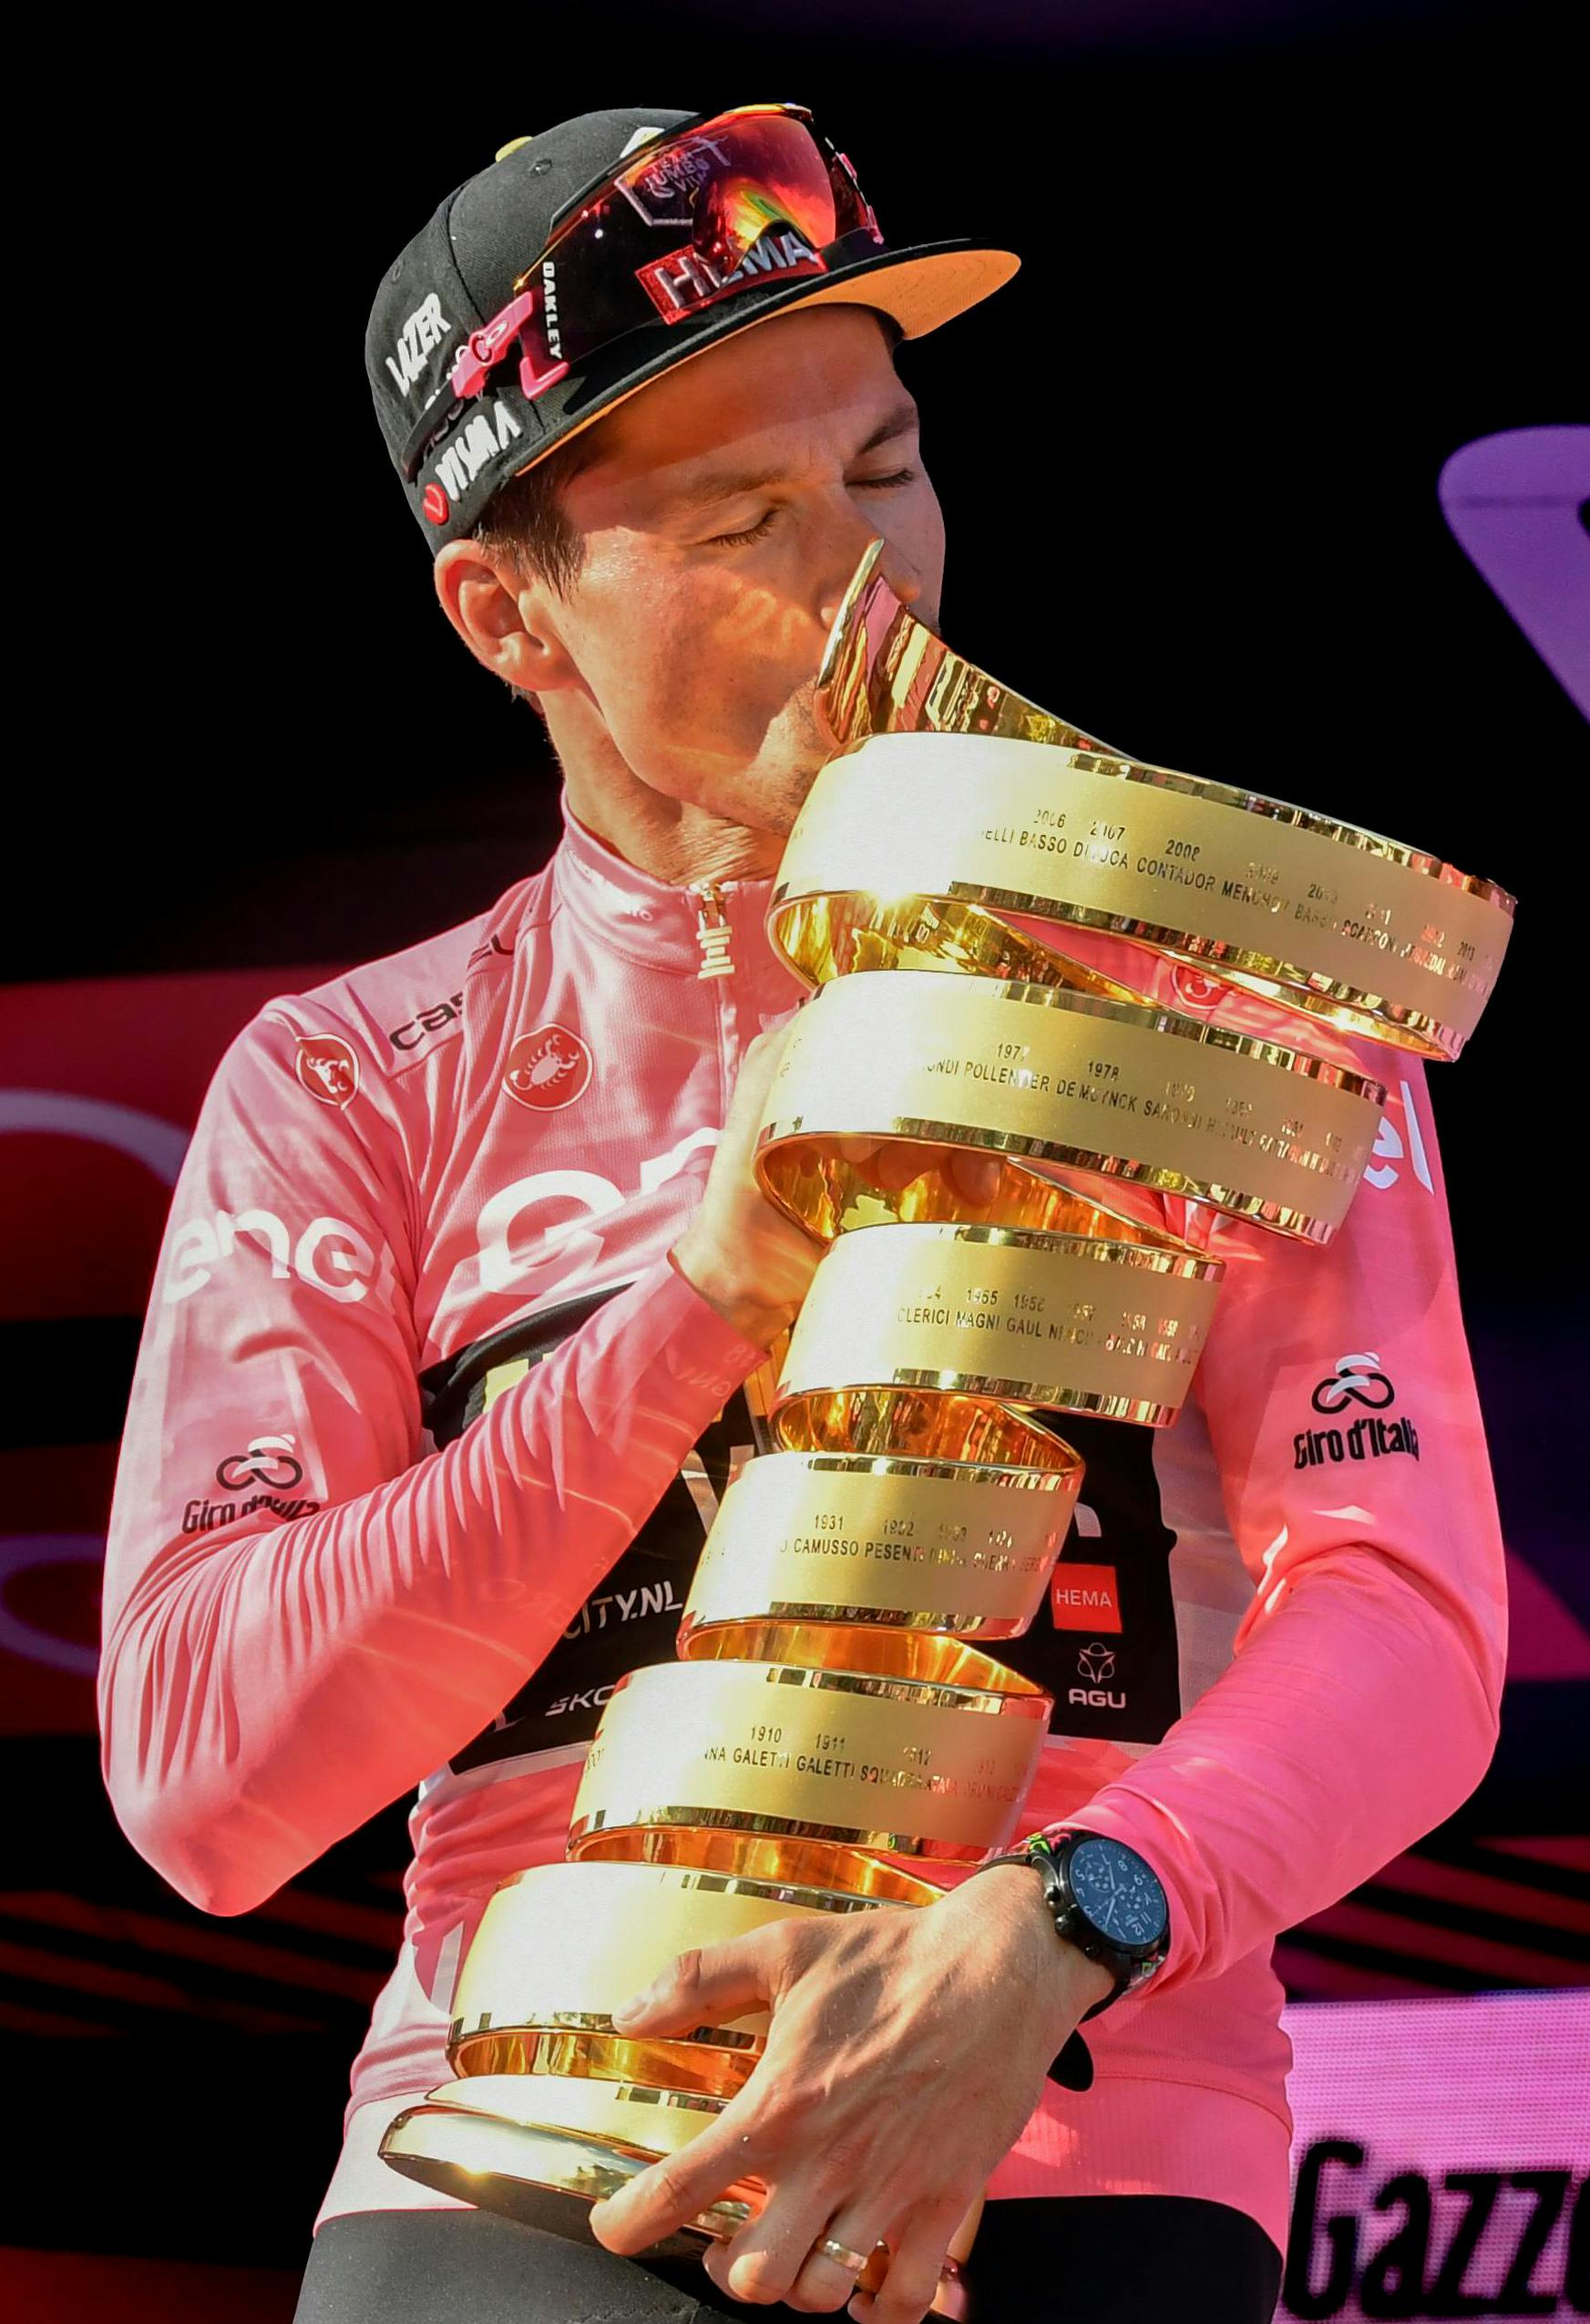 Primož Roglič wearing the Pink jersey stands on the top step of the Giro d’Italia podium and kisses the winner’s trophy.